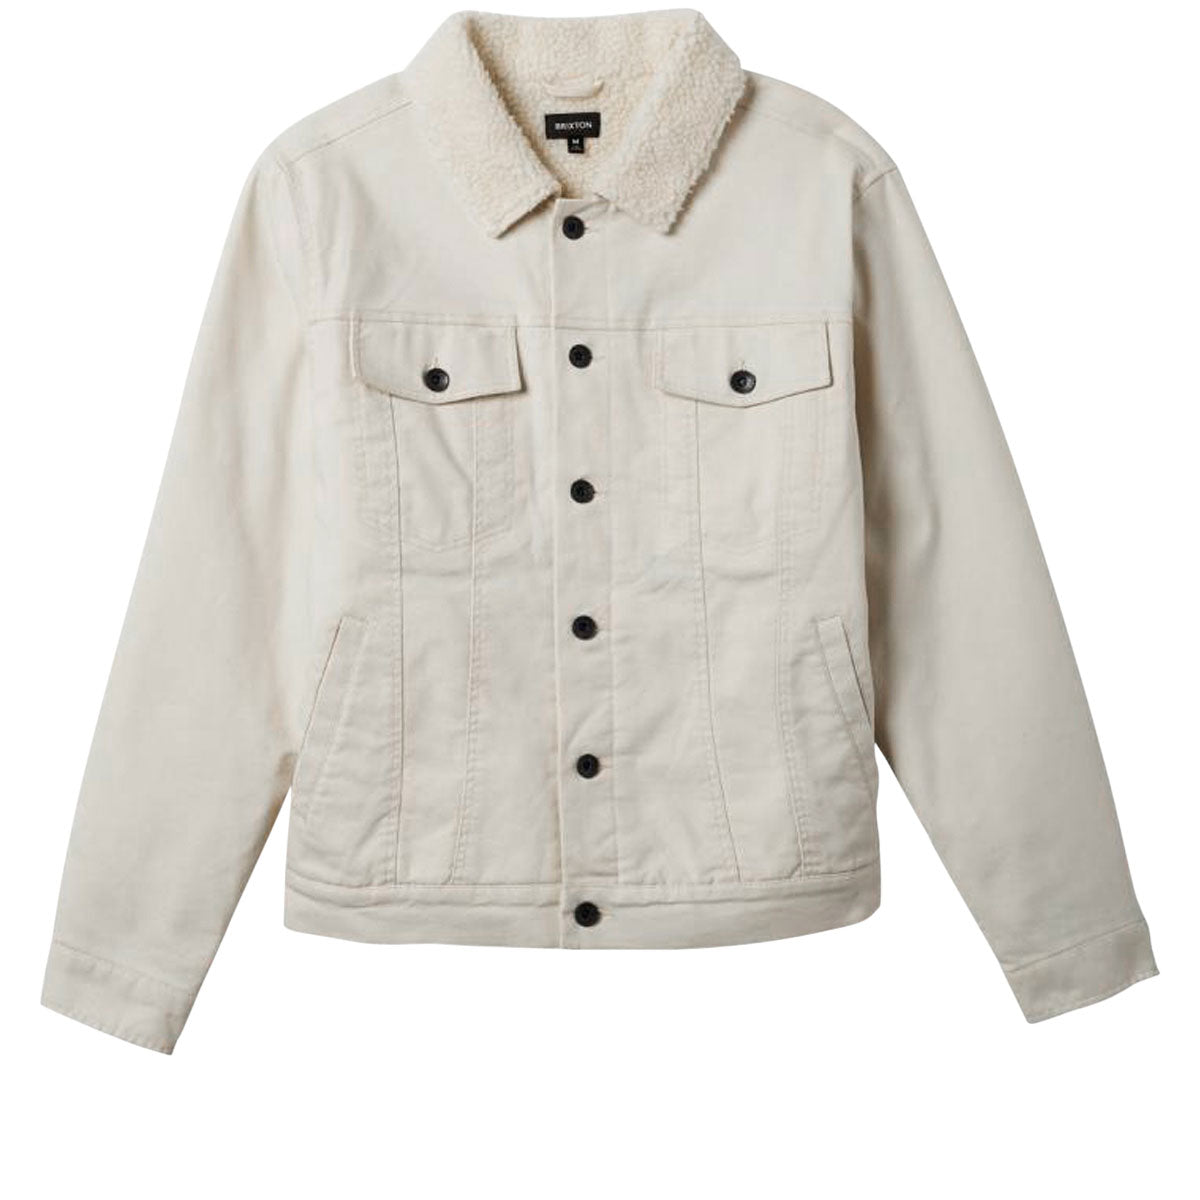 Brixton Builders Cable Lined Trucker Jacket - Natural image 1